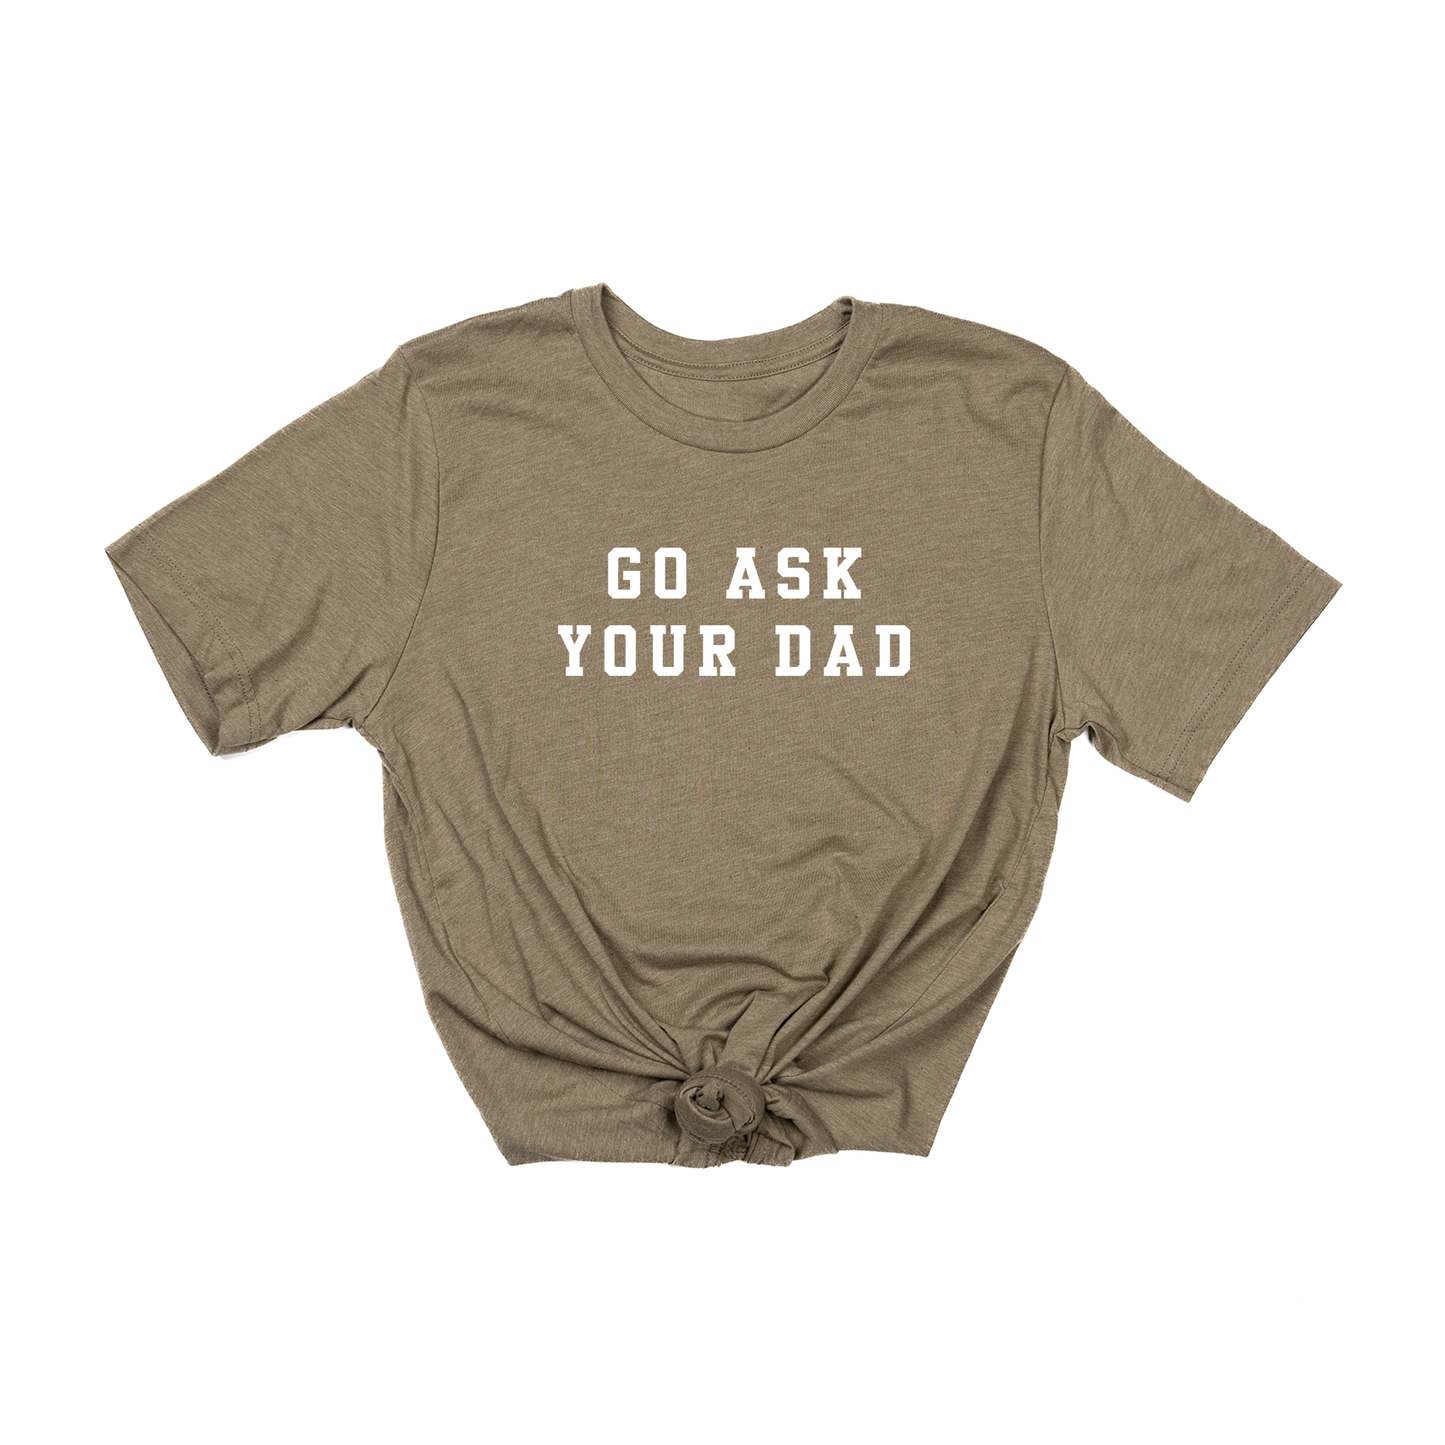 Go Ask Your Dad (White) - Tee (Olive)